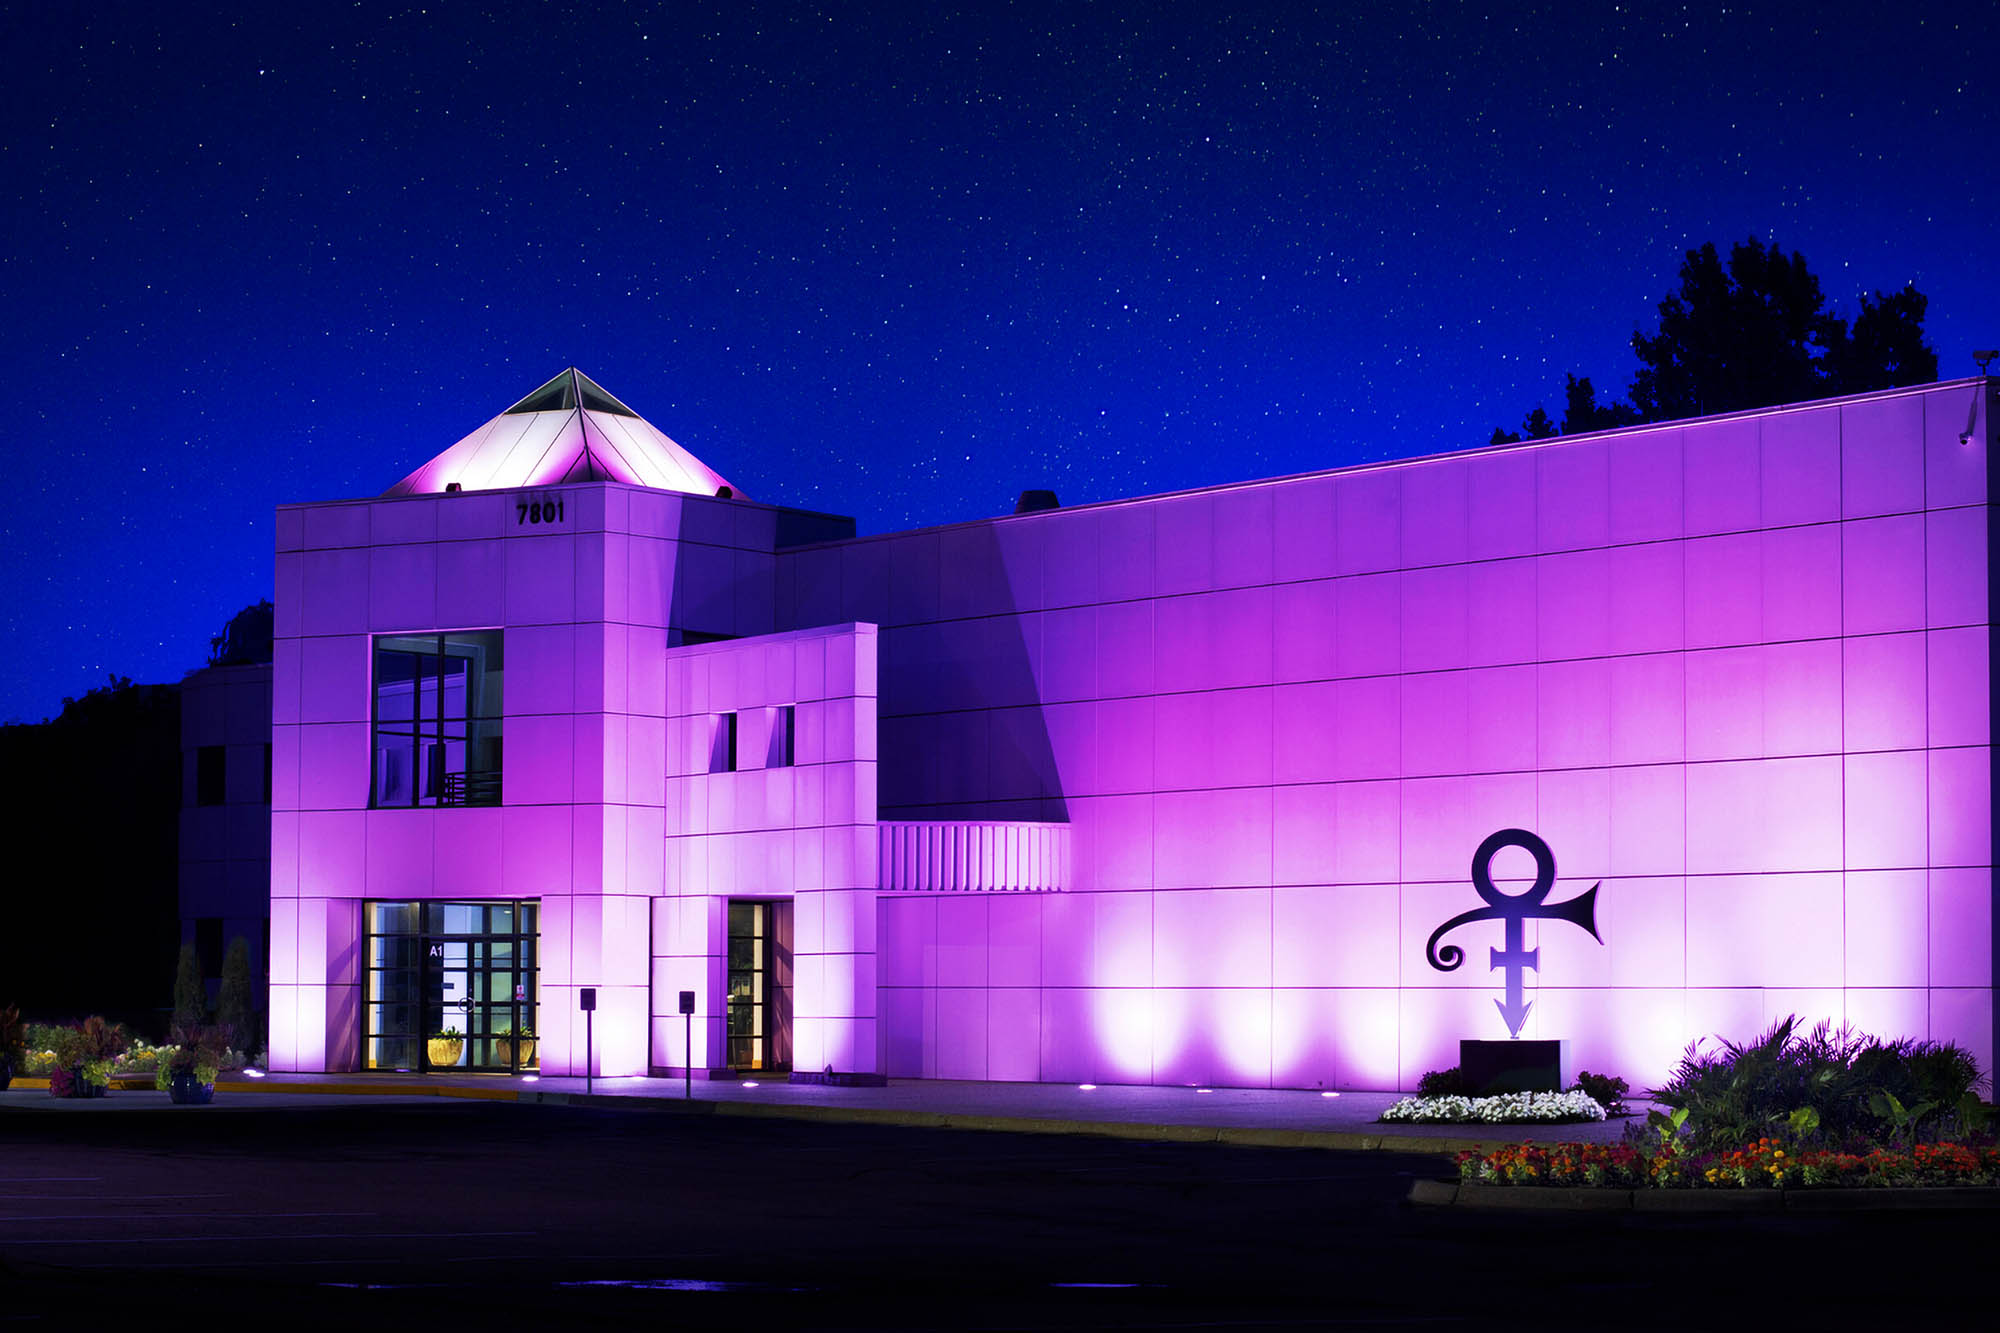 Building in Paisely Park illuminated with purple lights